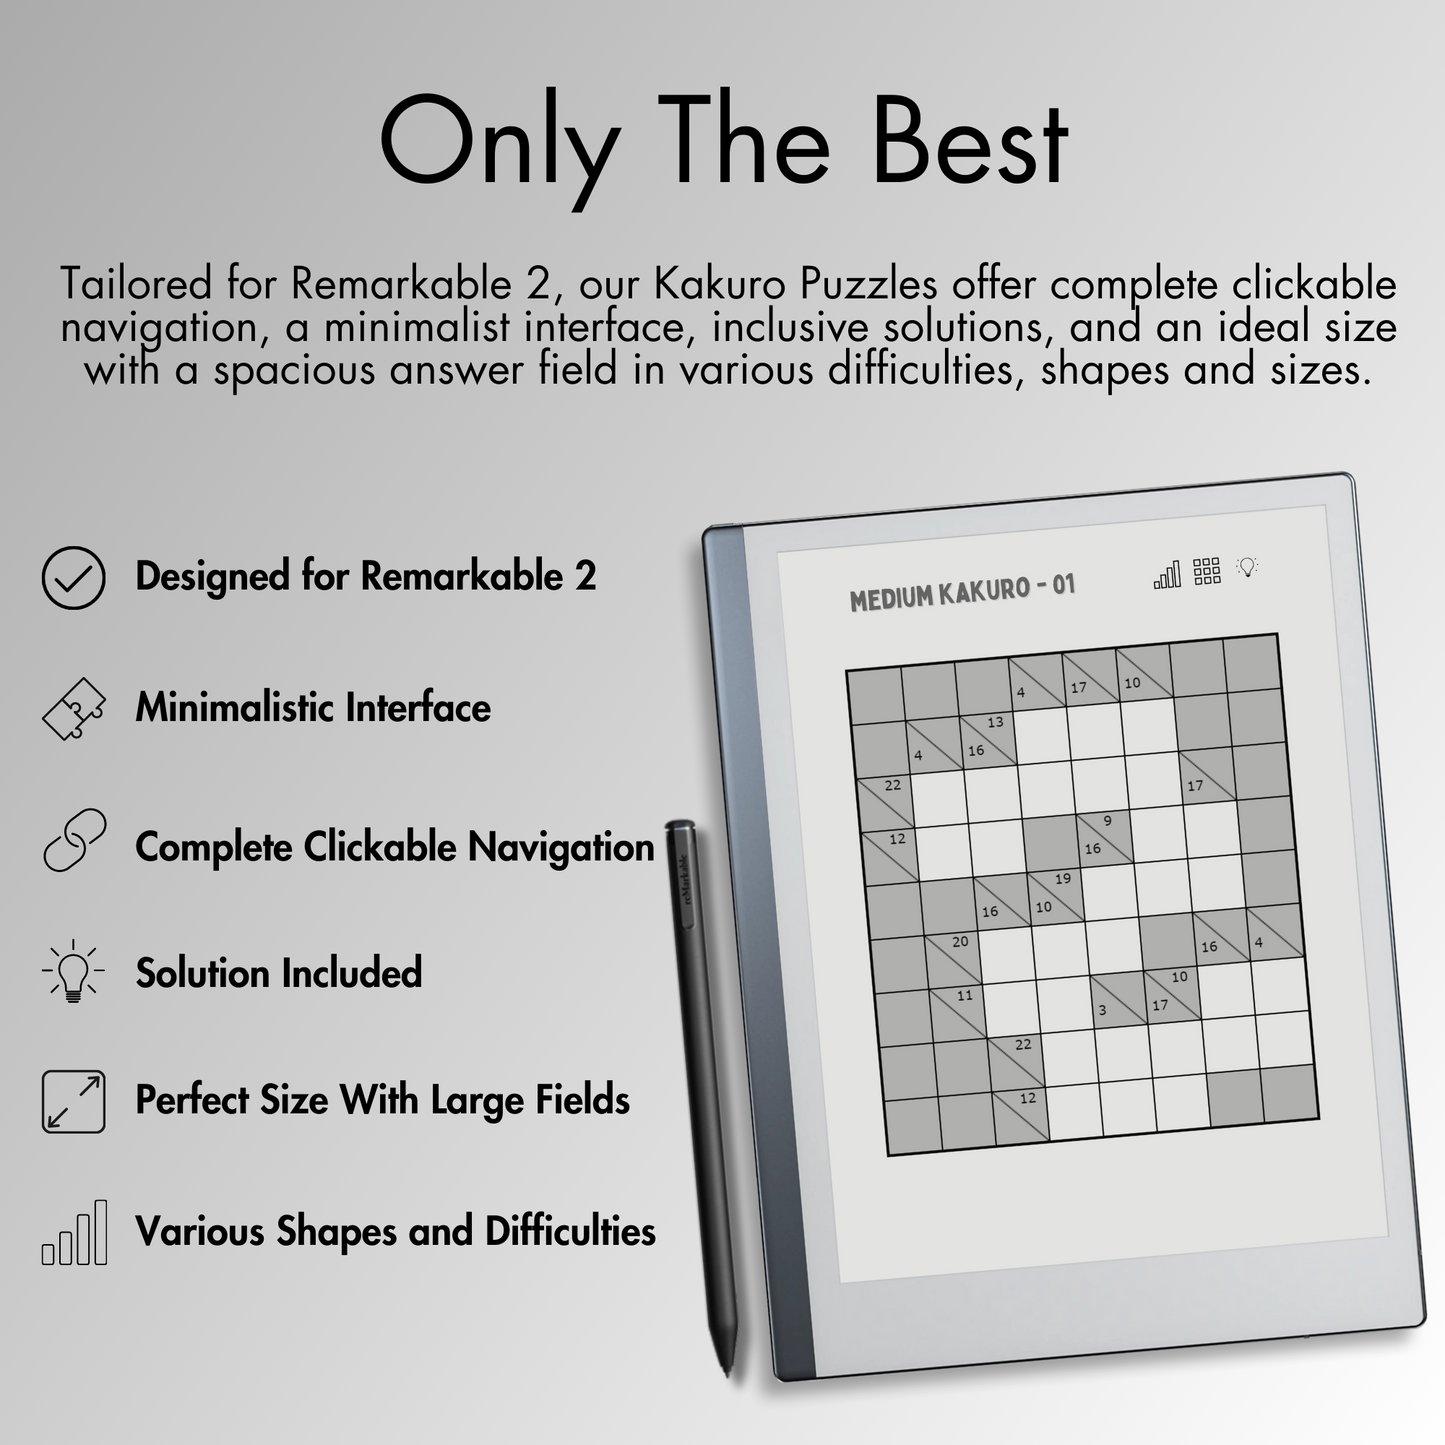 Our Kakuro Puzzles offer complete clickable navigation, a minimalist interface, inclusive solutions, and an ideal size with a spacious answer field for Remarkable 2 E-Ink screen.